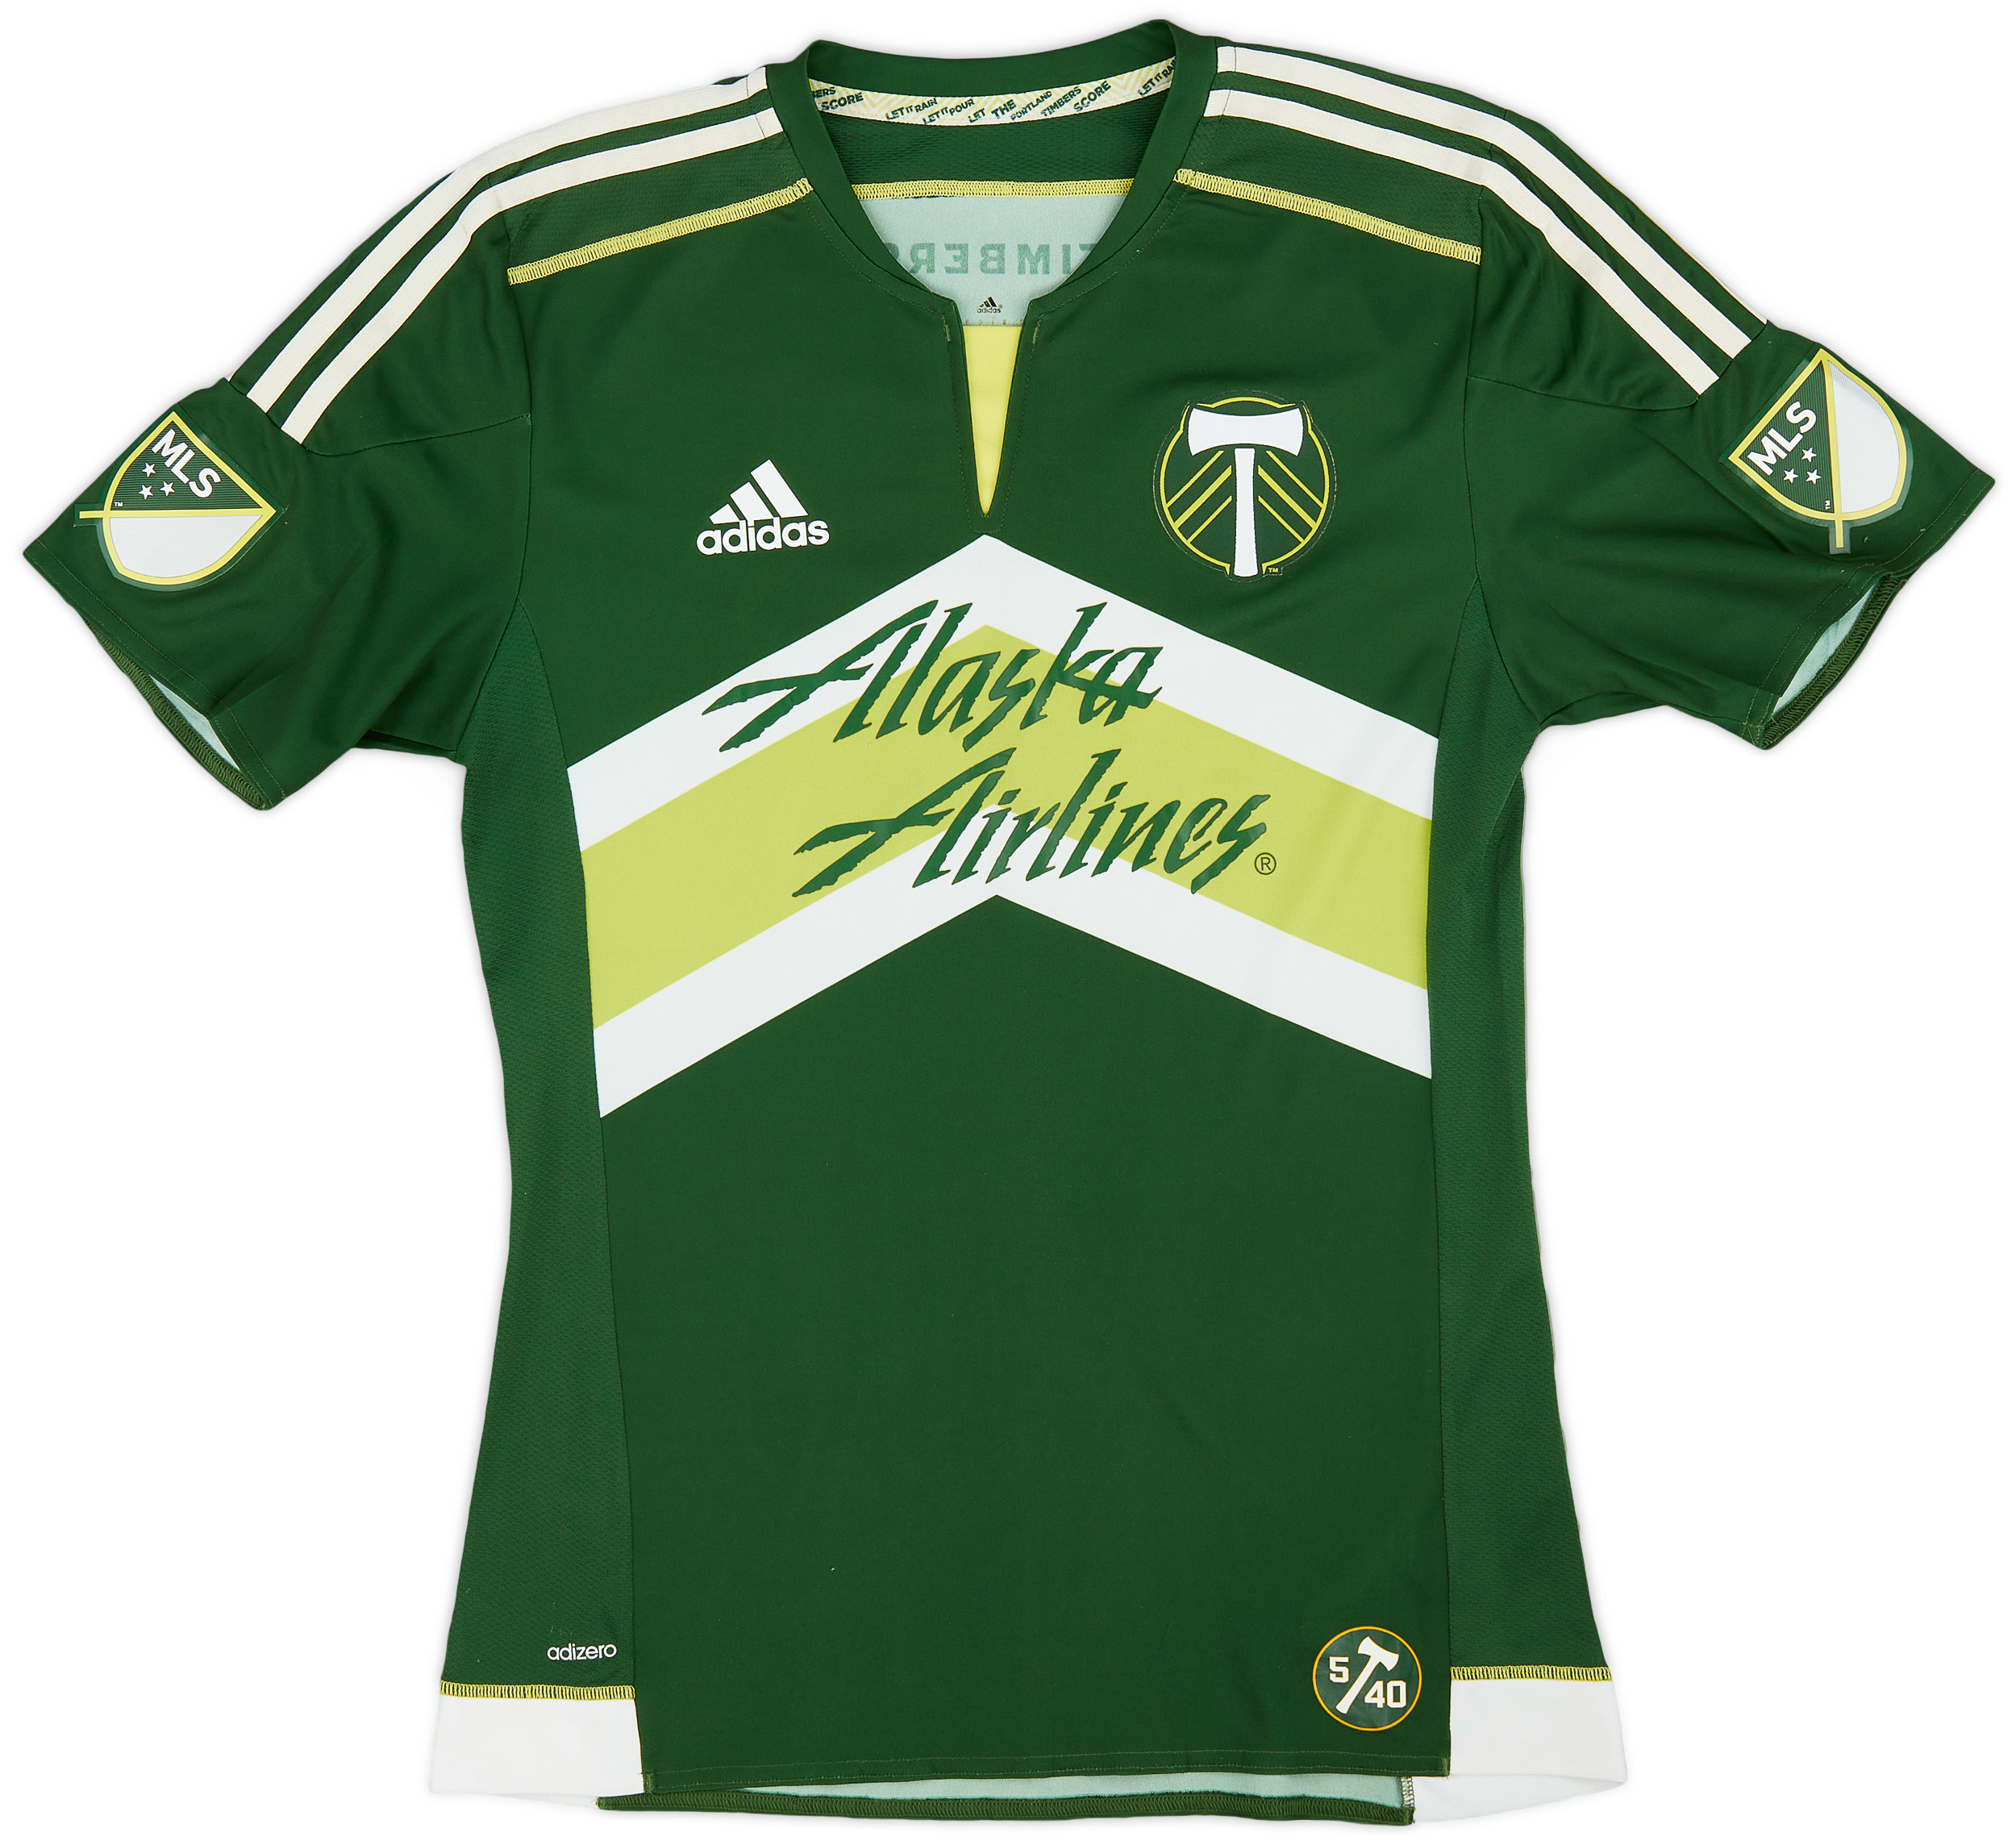 2015-16 Portland Timbers Authentic Home Shirt - 8/10 - ()